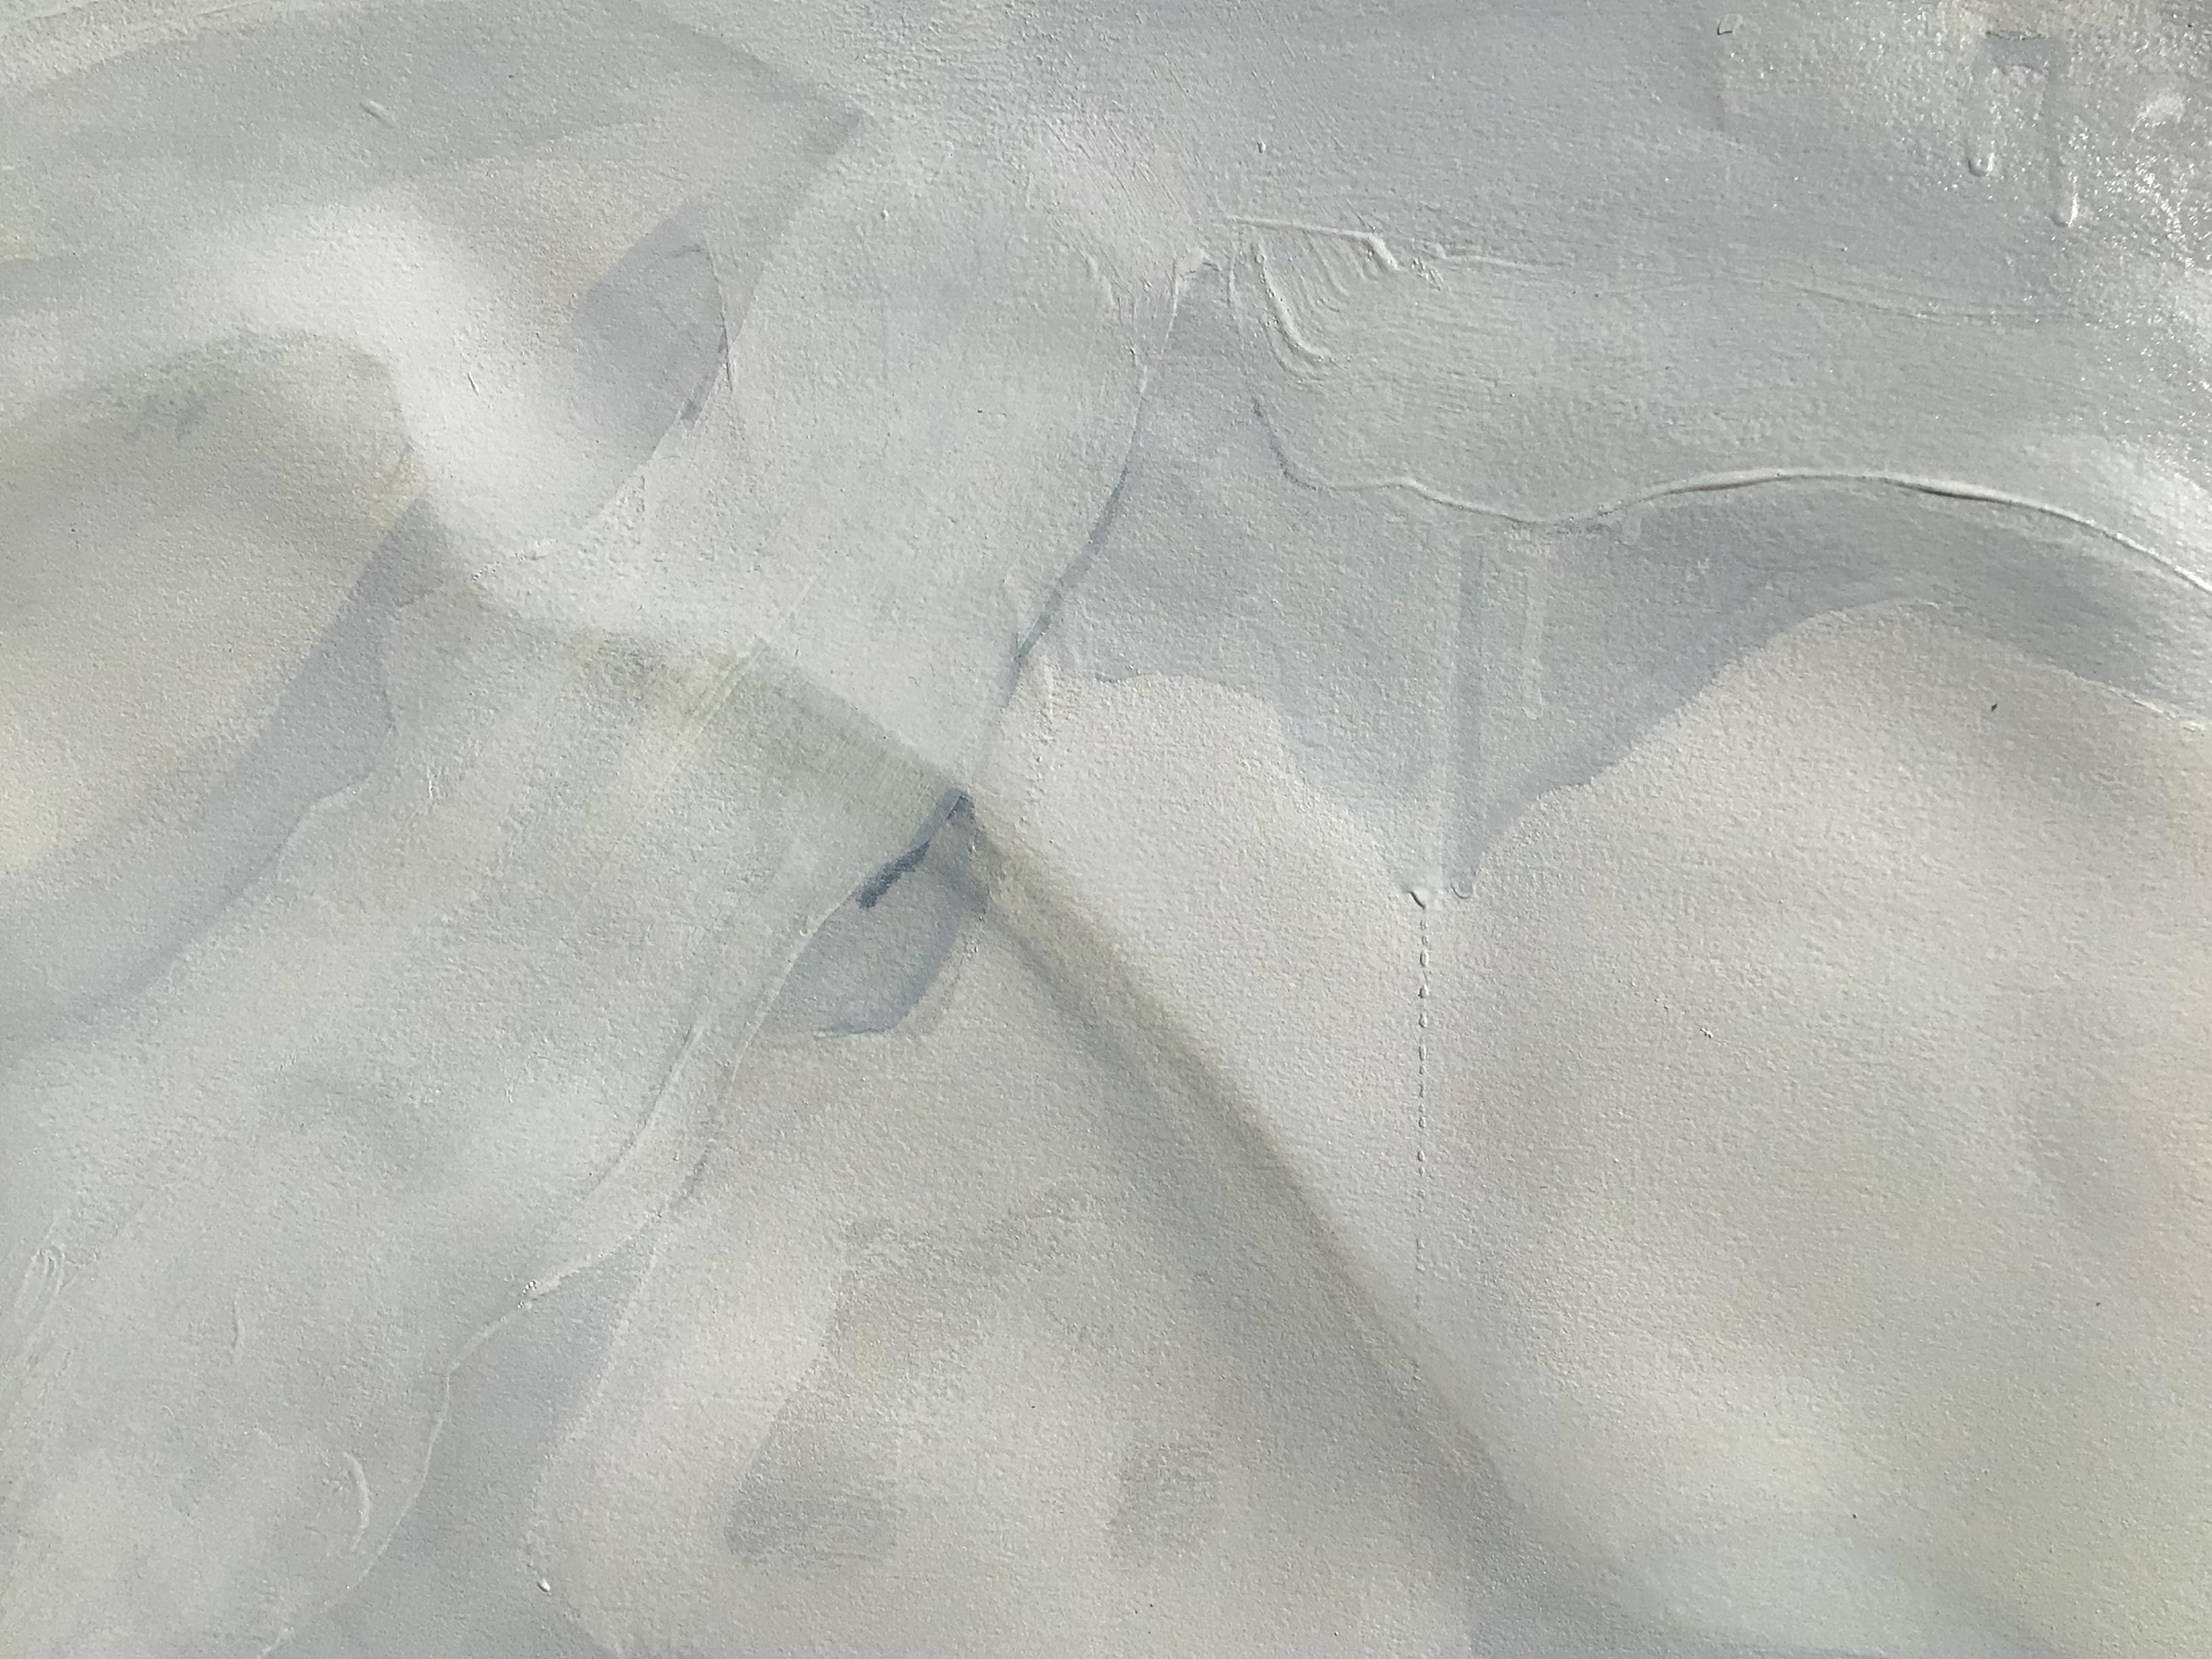 THE LAND BETWEEN - Gray Abstract Painting by Joanna Cutri